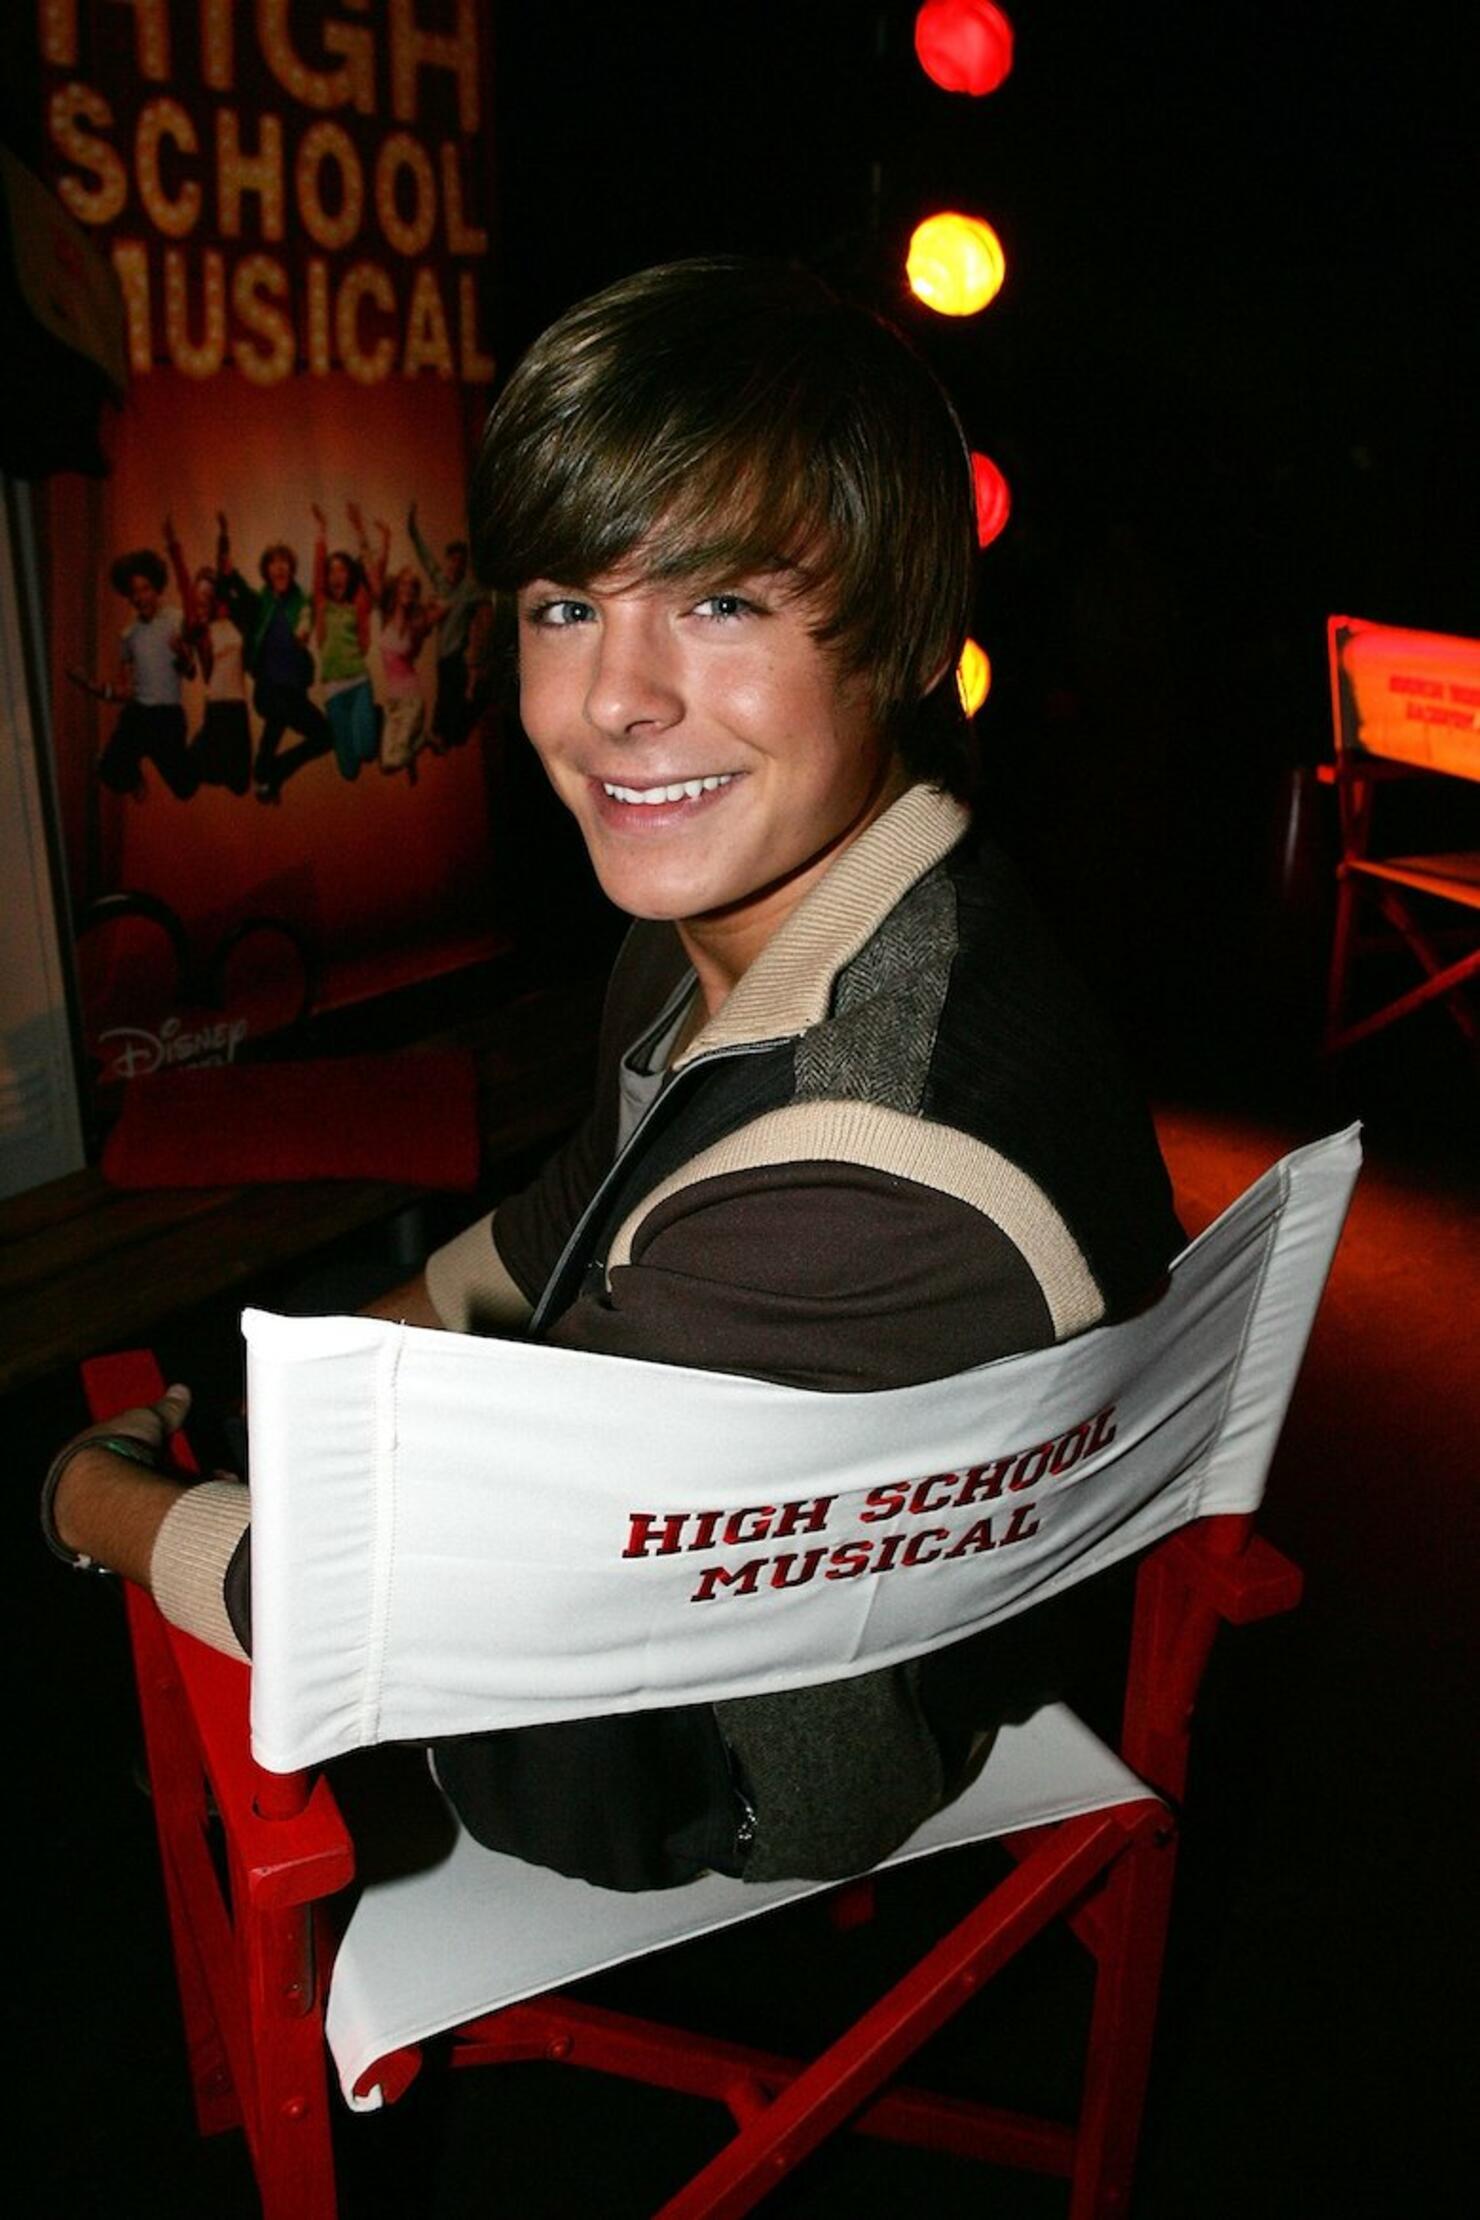 "High School Musical" Press Conference